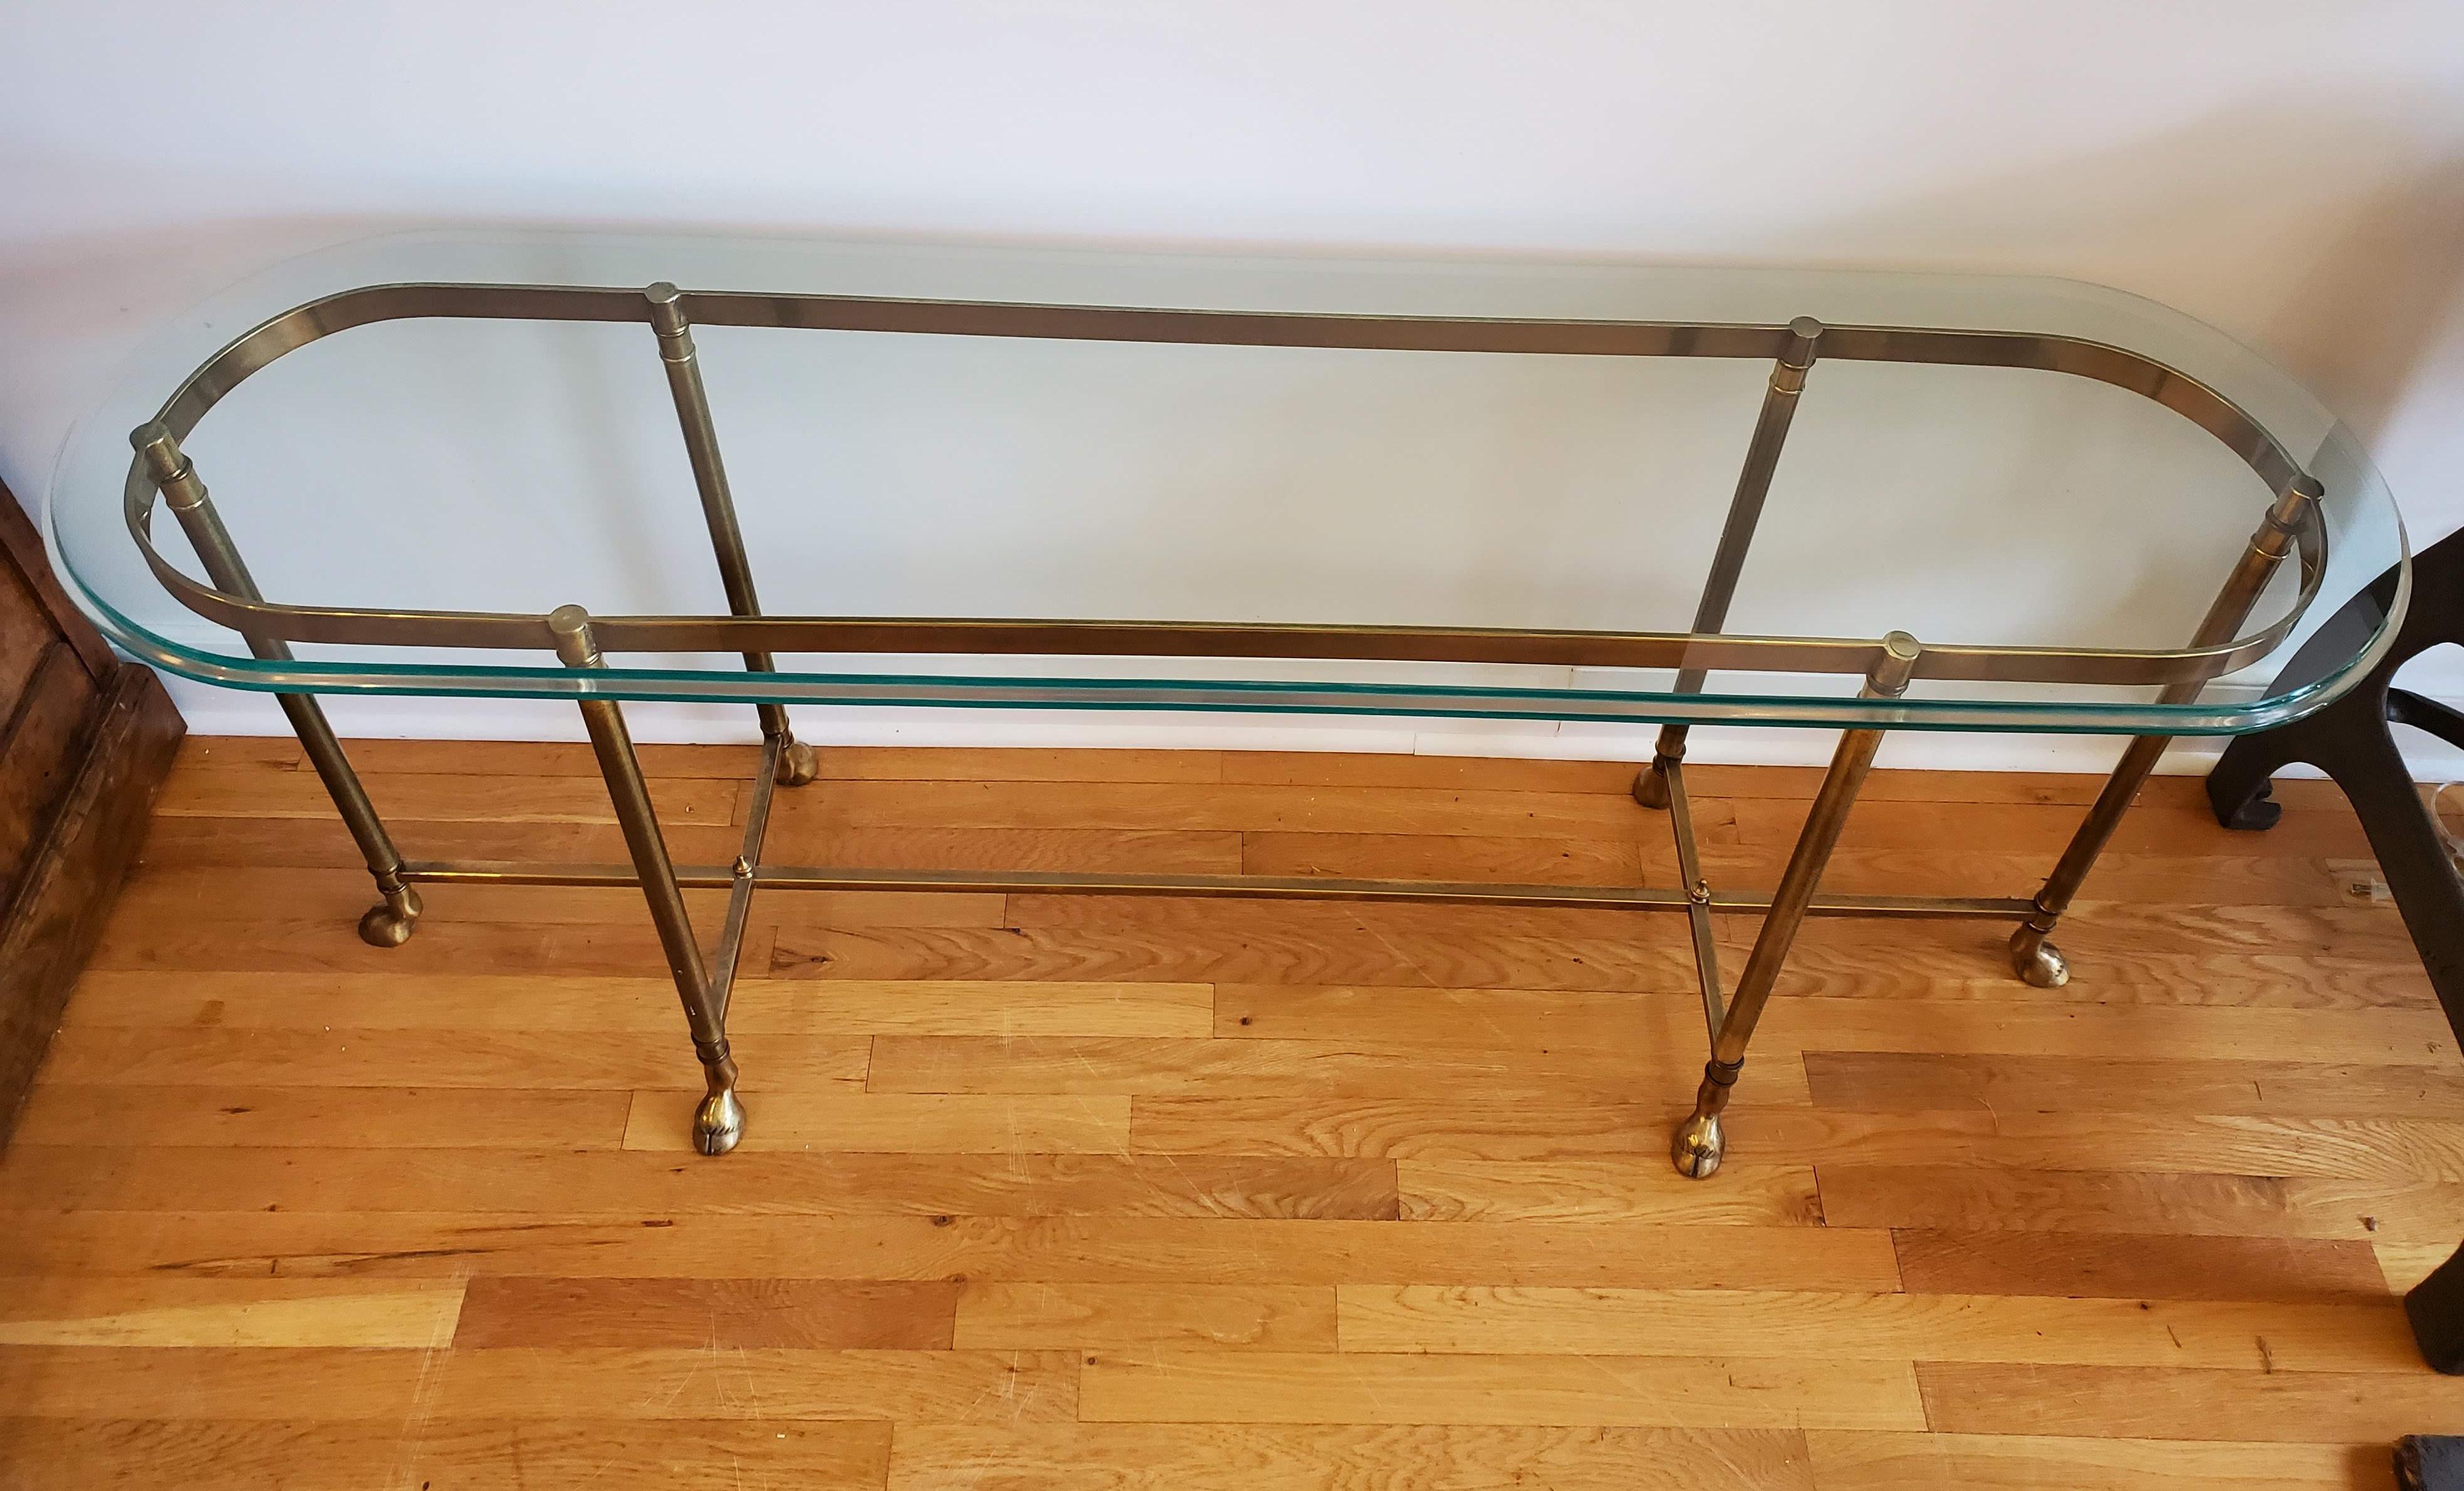 Modern narrow sofa table. Made of brass. Six legs with decorative “hoof” feet with the original glass top.
Measures: 27” H 62” W 18” D.
 